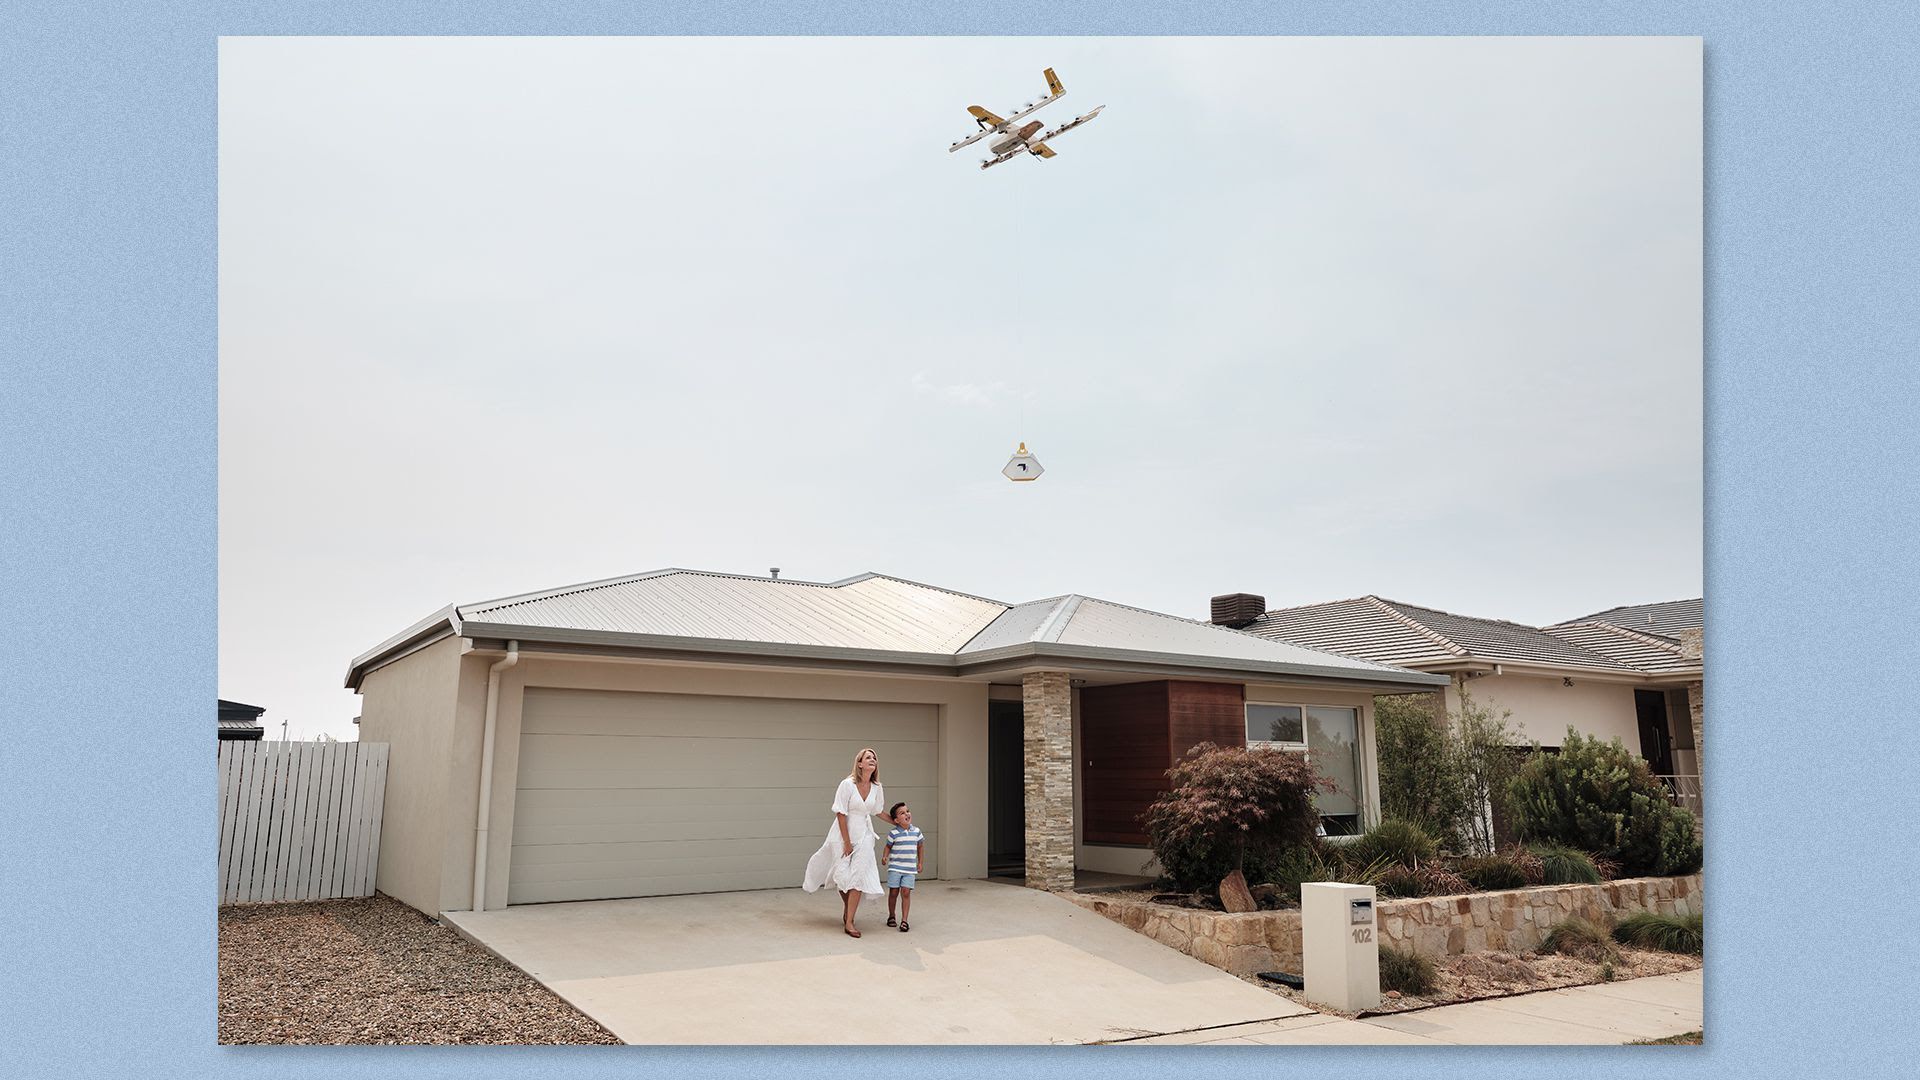 In Logan, Australia, a mother and child await a package delivery by drone